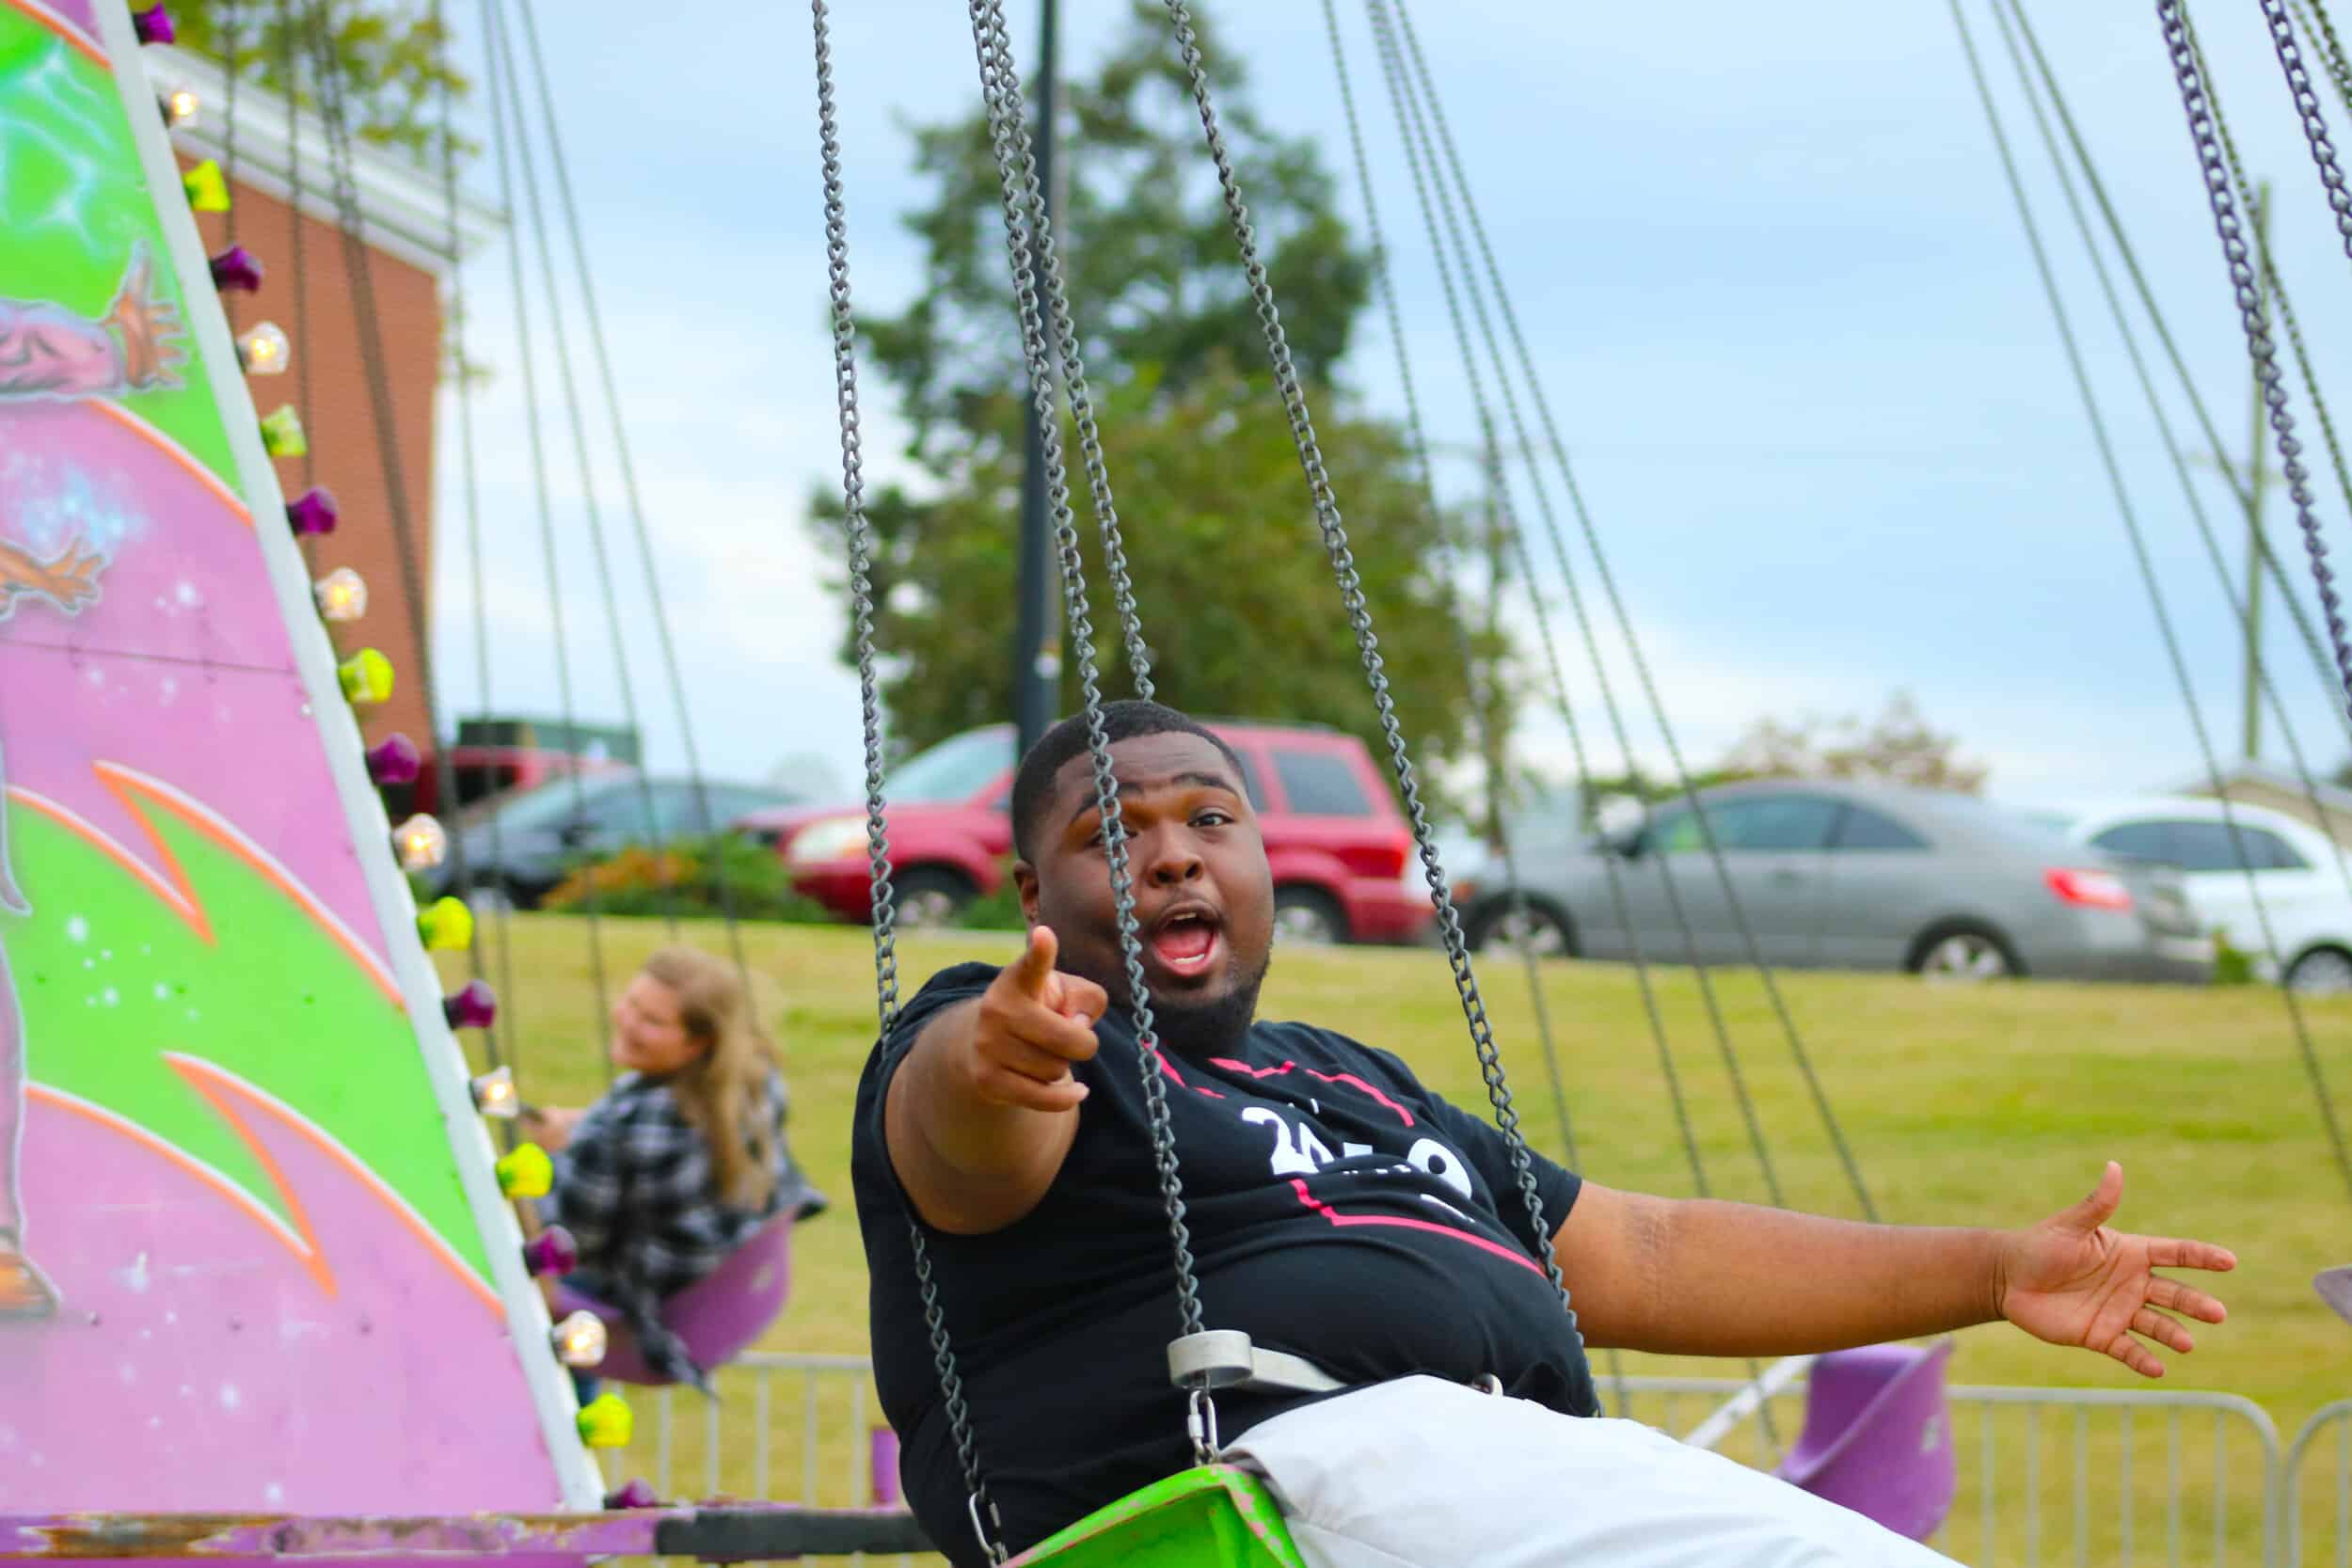 Sophomore Paul Scotland is one of the first people to try out the swings at the Fall for Tigerville fair.